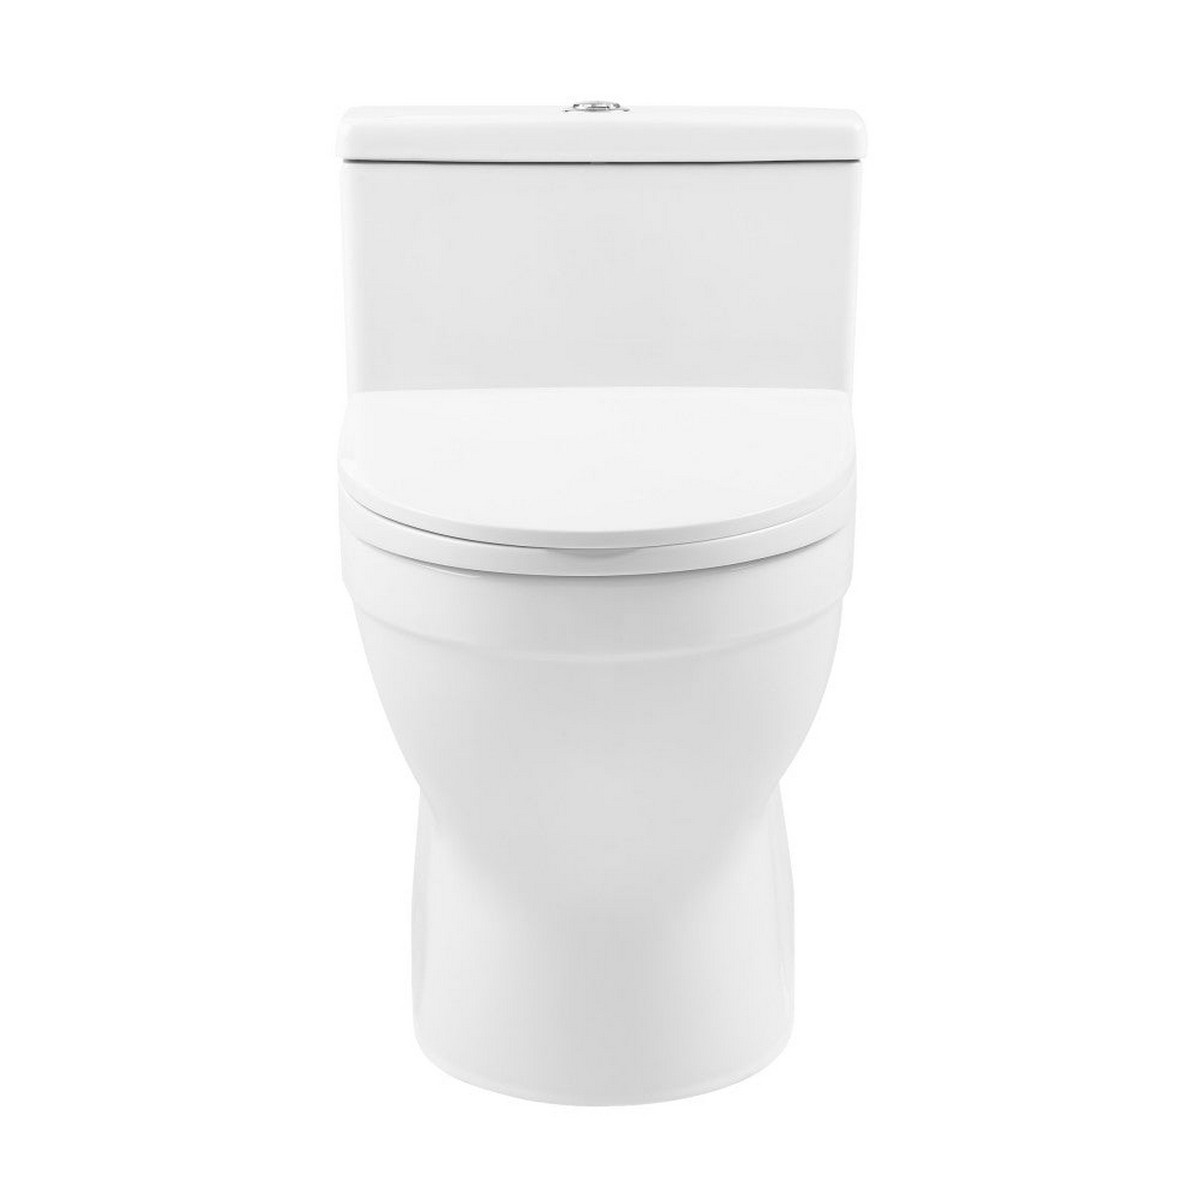 SWISS MADISON CT-1T170 CLICHY 1.1/1.6 GPF DUAL FLUSH ONE-PIECE ELONGATED TOILET IN GLOSSY WHITE